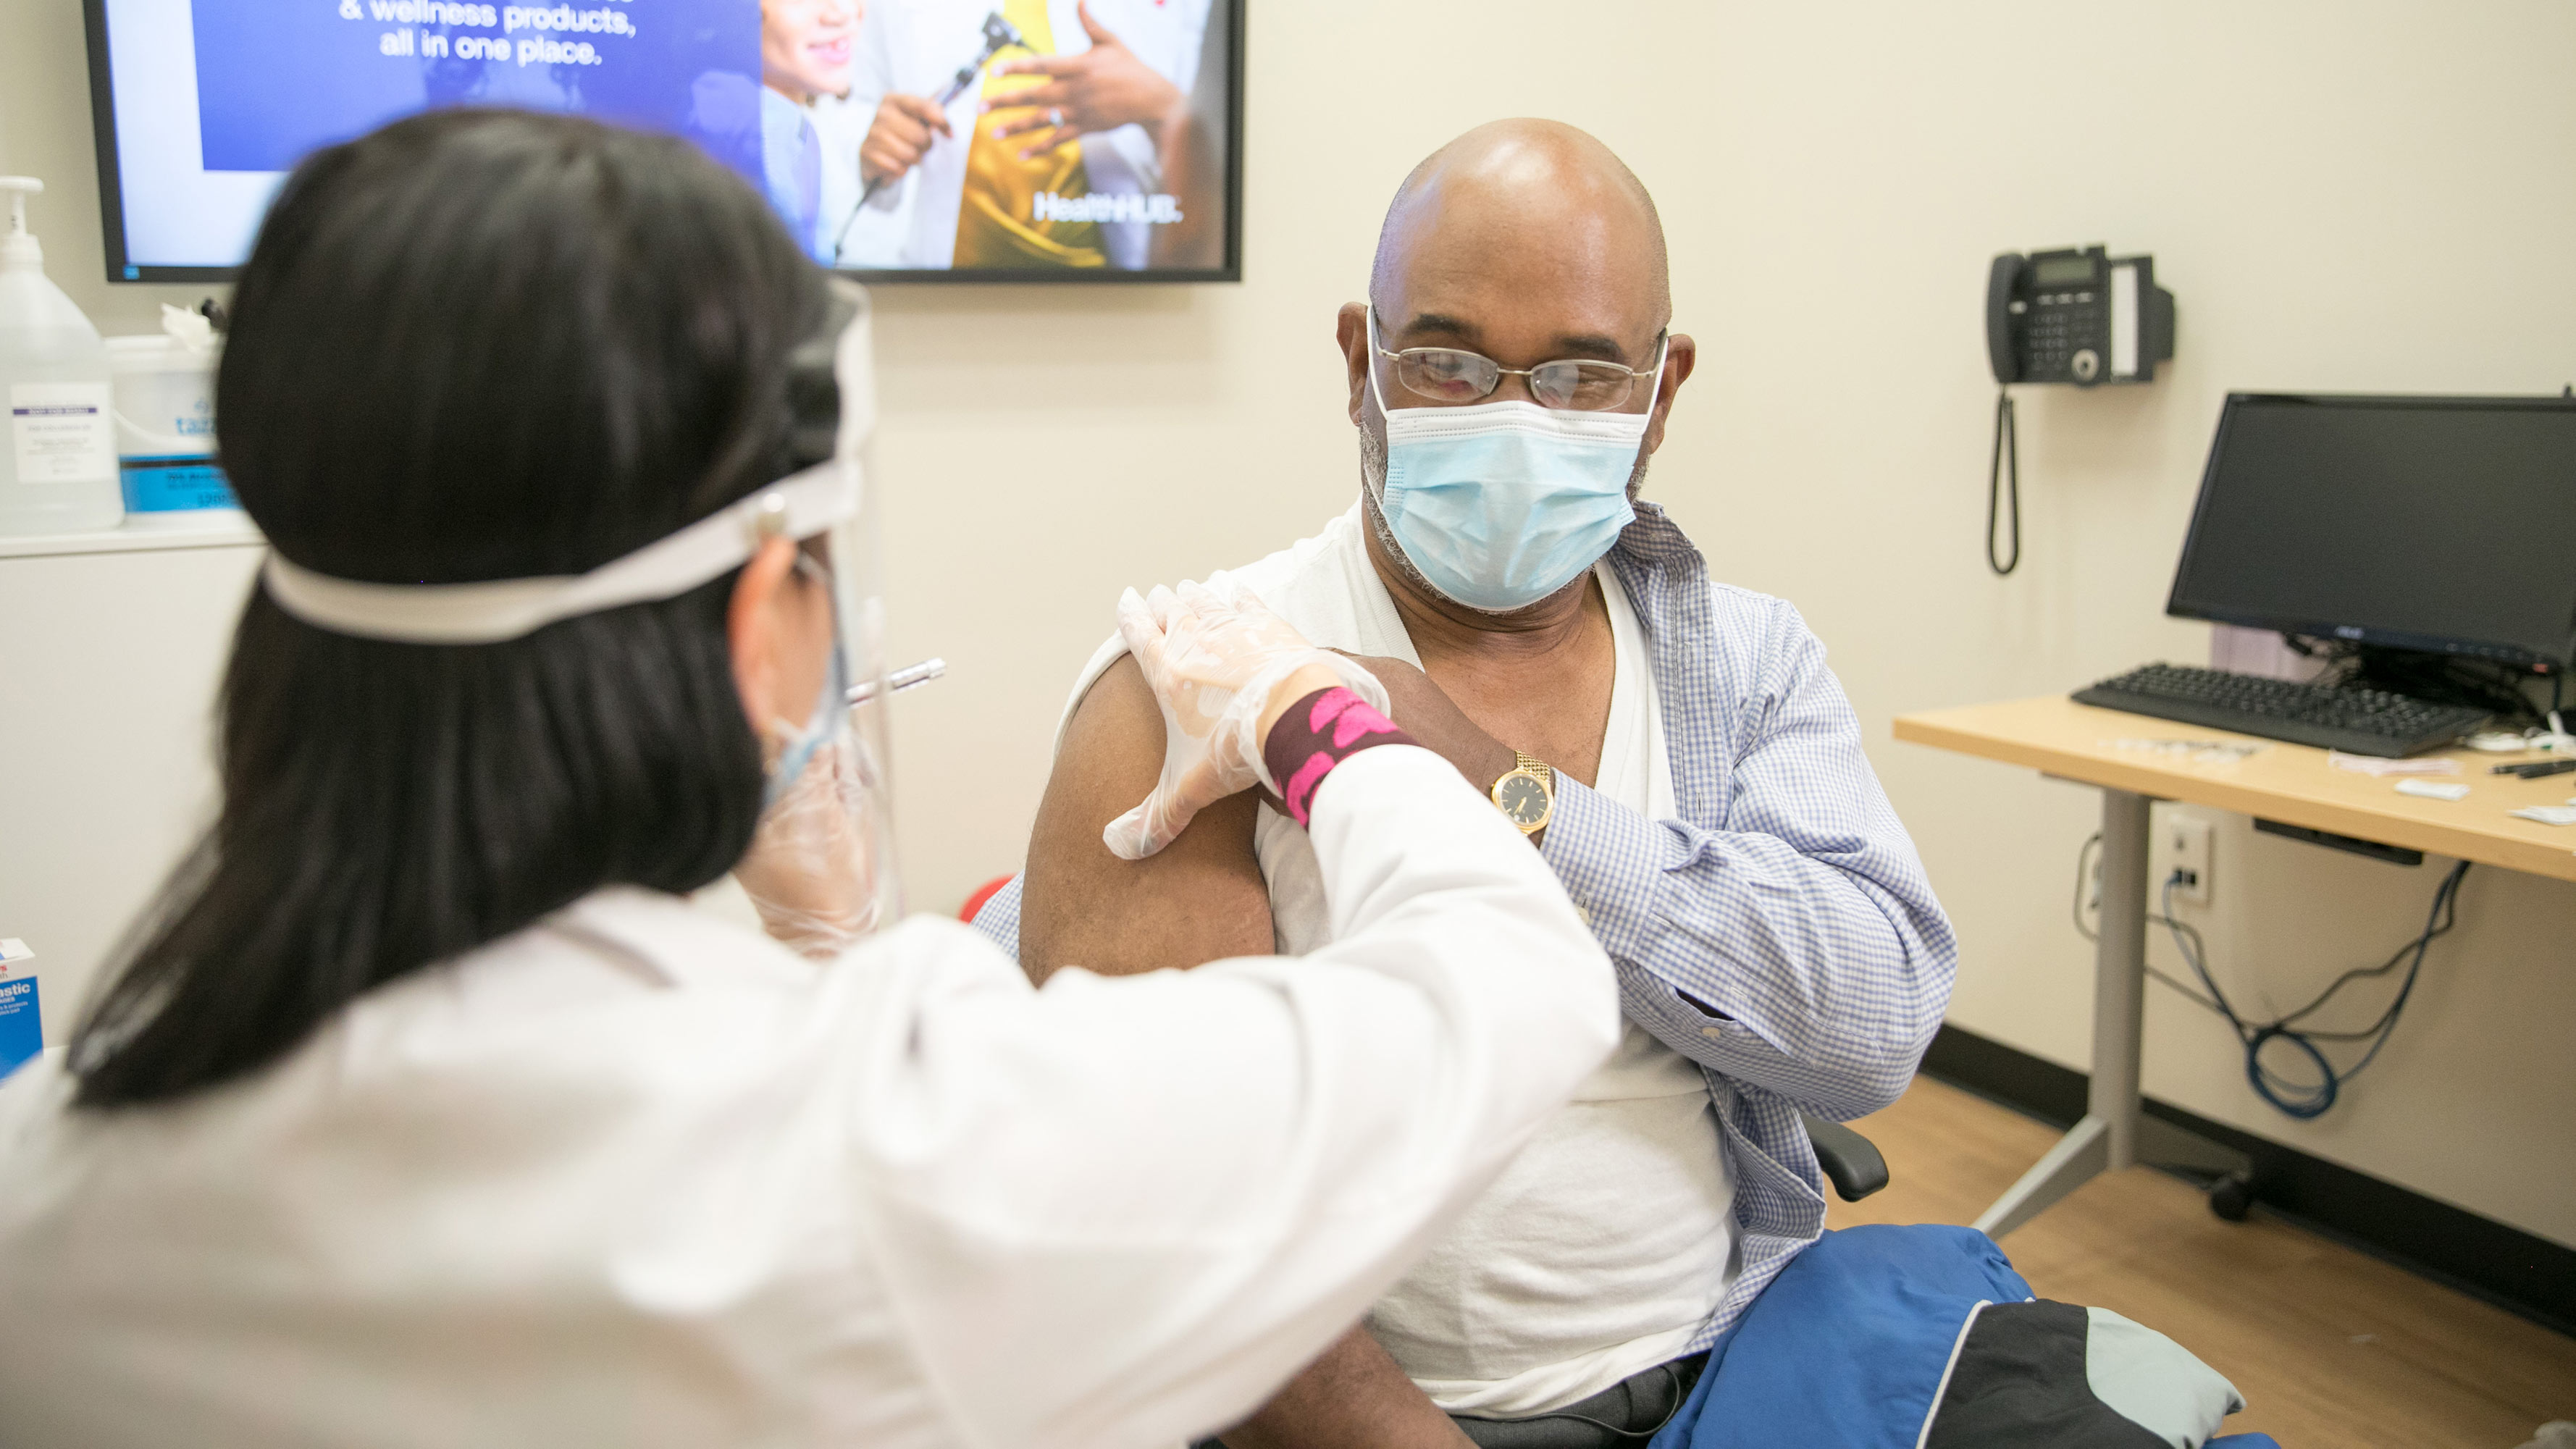 A man is seen receiving a vaccination at a CVS Pharmacy location.